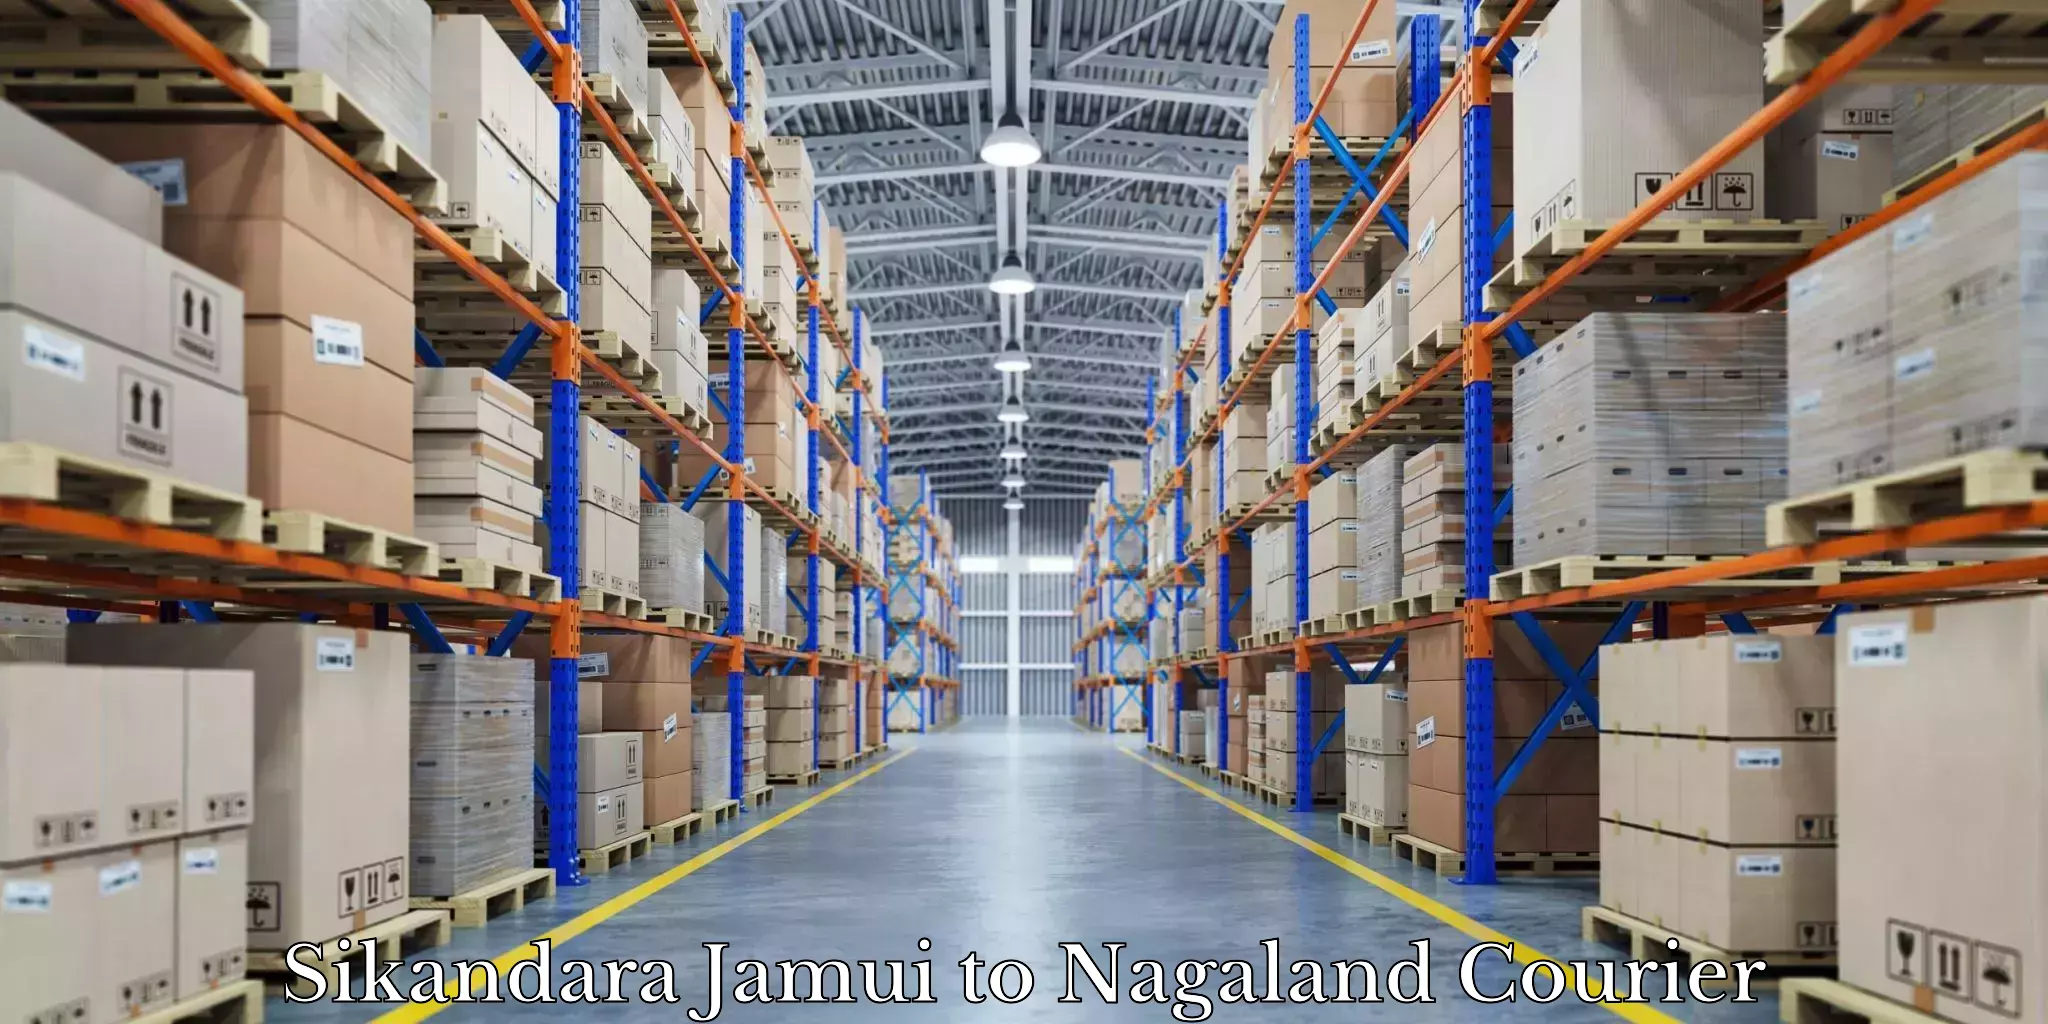 Quality moving services in Sikandara Jamui to Nagaland